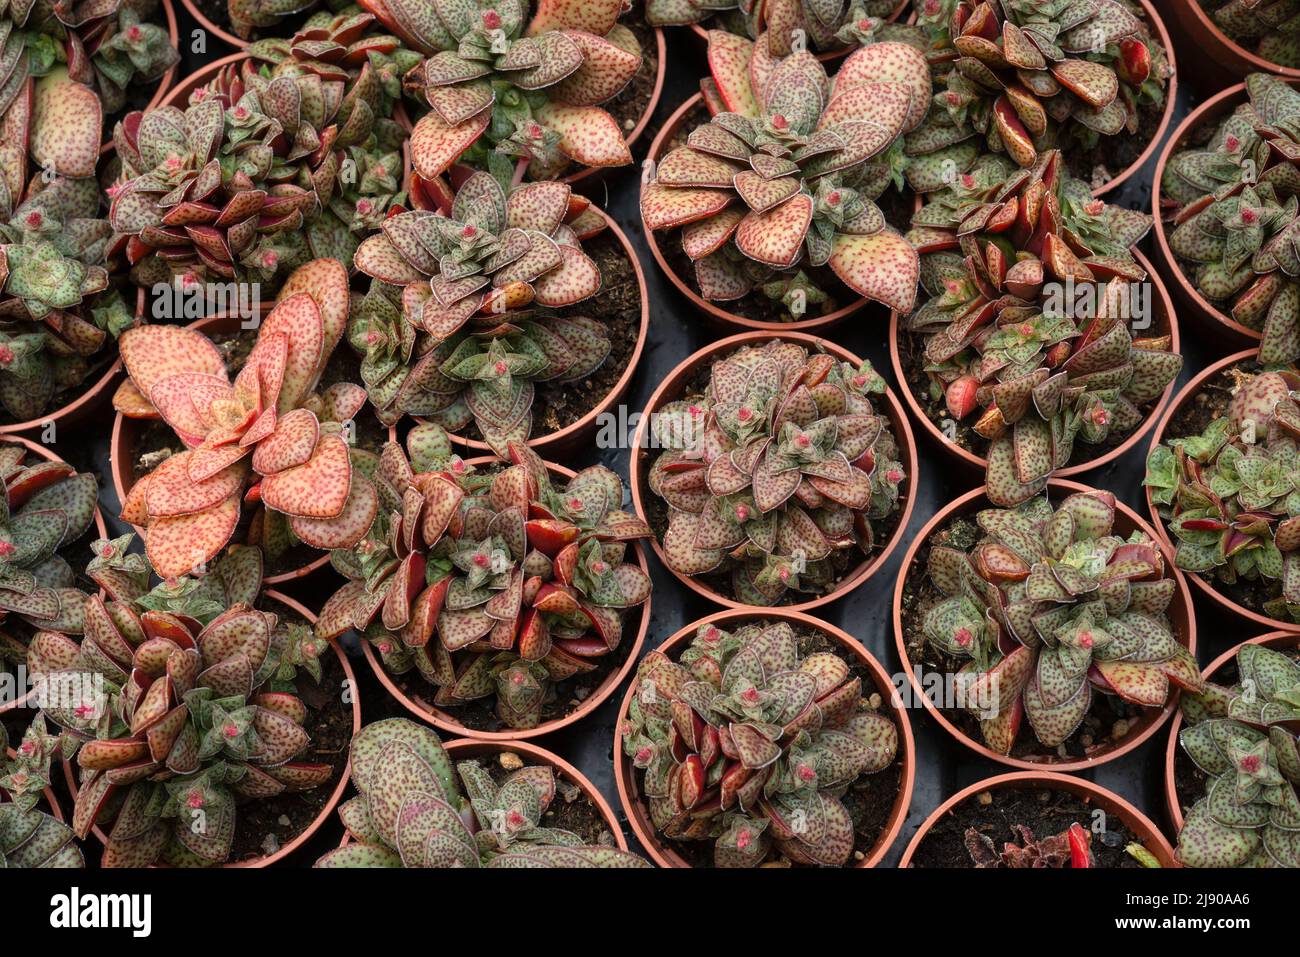 High Angle View Of Potted Crassula Exilis In Market Stock Photo